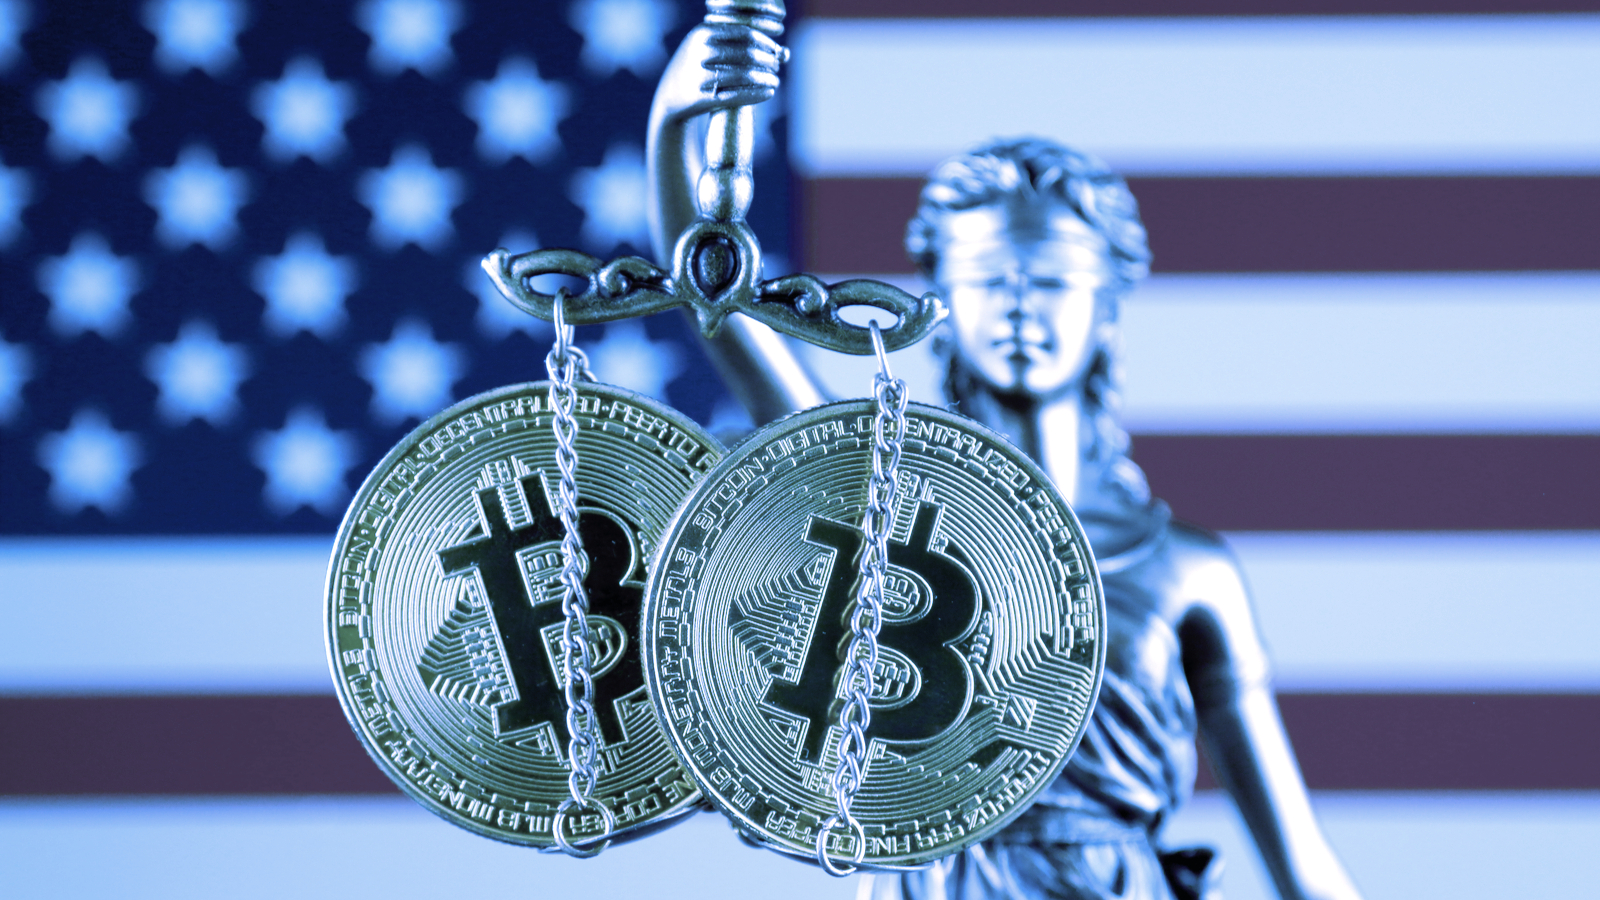 US Agencies In ‘Sprint’ to Align on Bitcoin Regulations